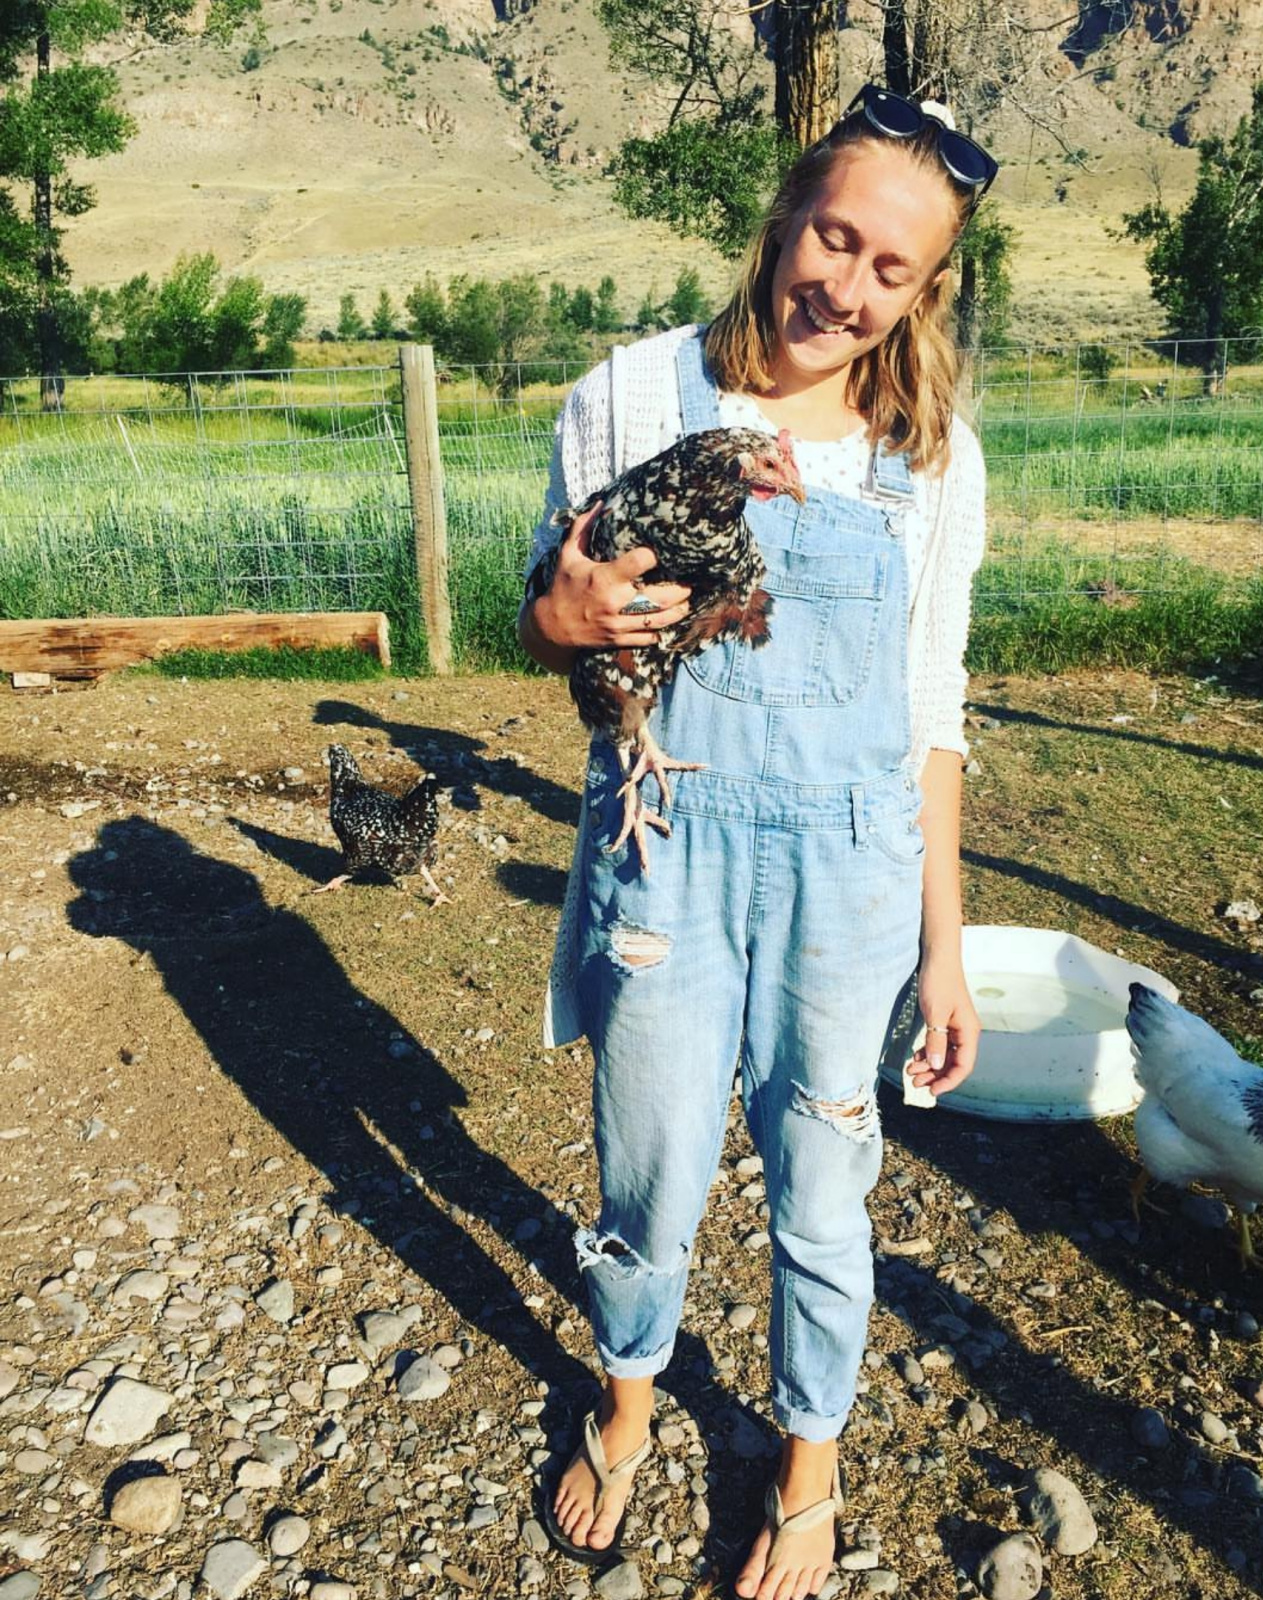 We were so proud of Lilly for overcoming her fear of chickens. I kinda wish we had a video of the chase. Lol!